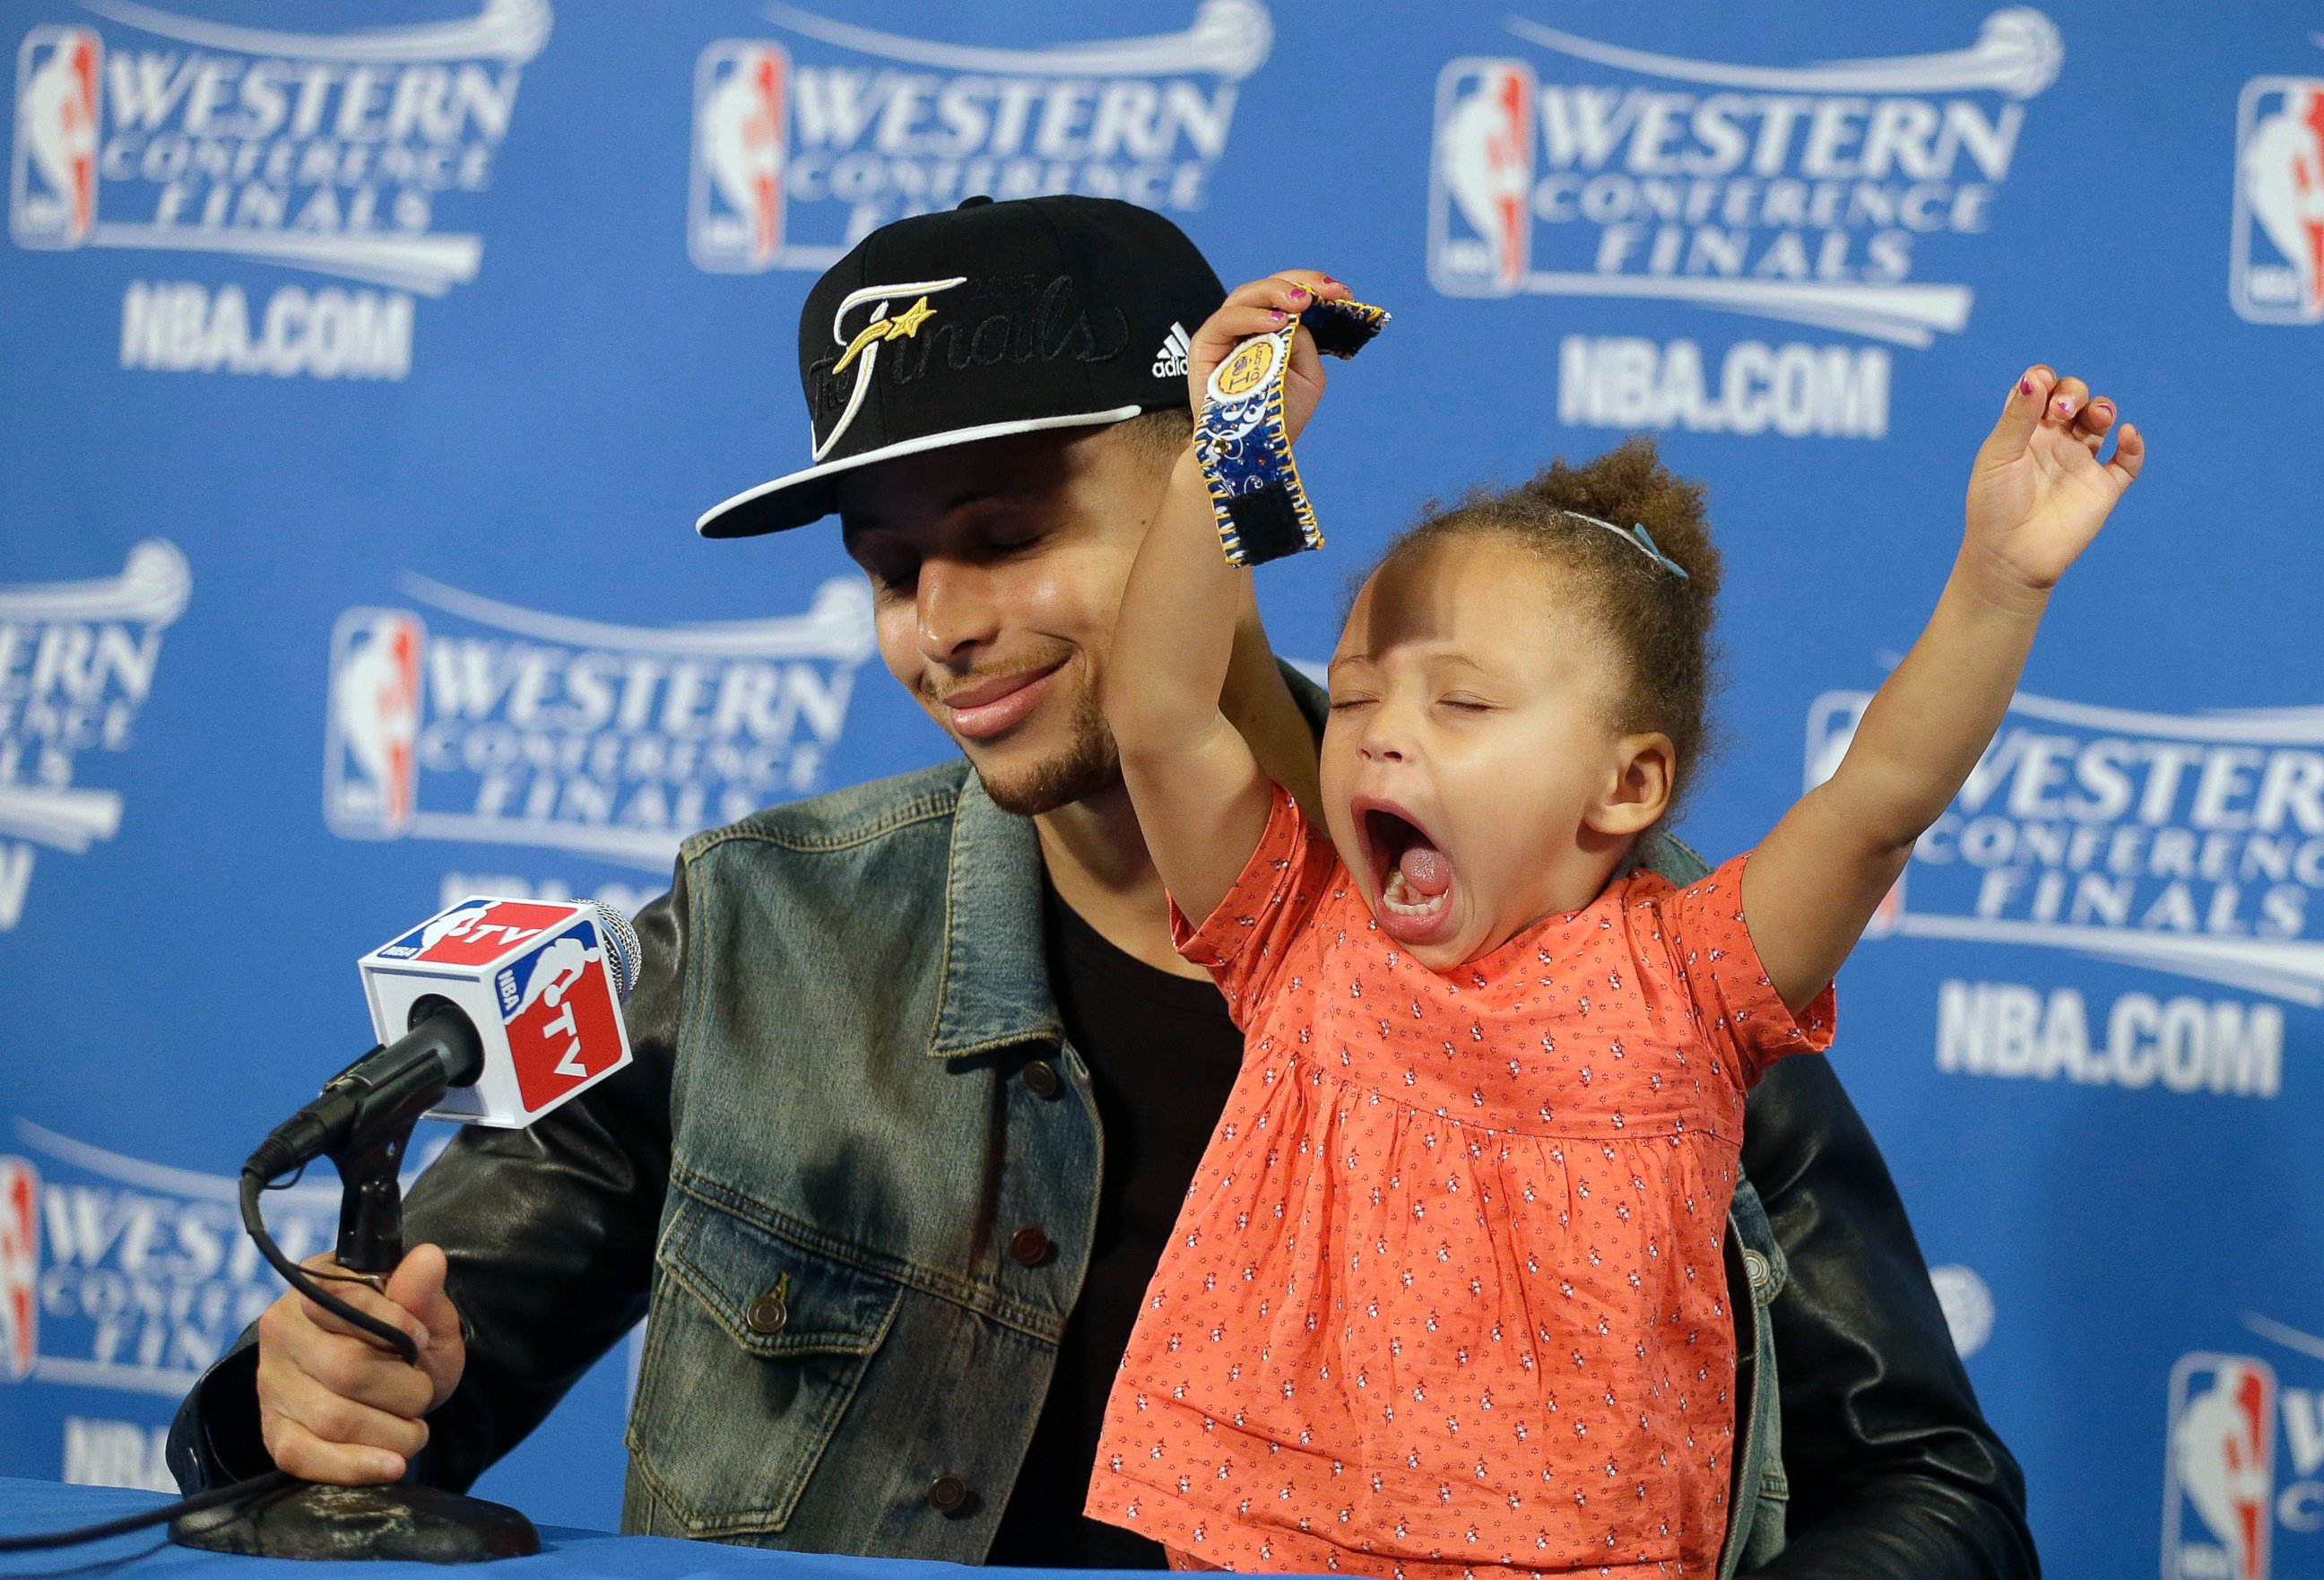 PHOTO: Golden State Warriors guard Stephen Curry is joined by his daughter Riley at a news conference after Game 5 of the NBA basketball Western Conference finals against the Houston Rockets in Oakland, Calif., May 27, 2015.